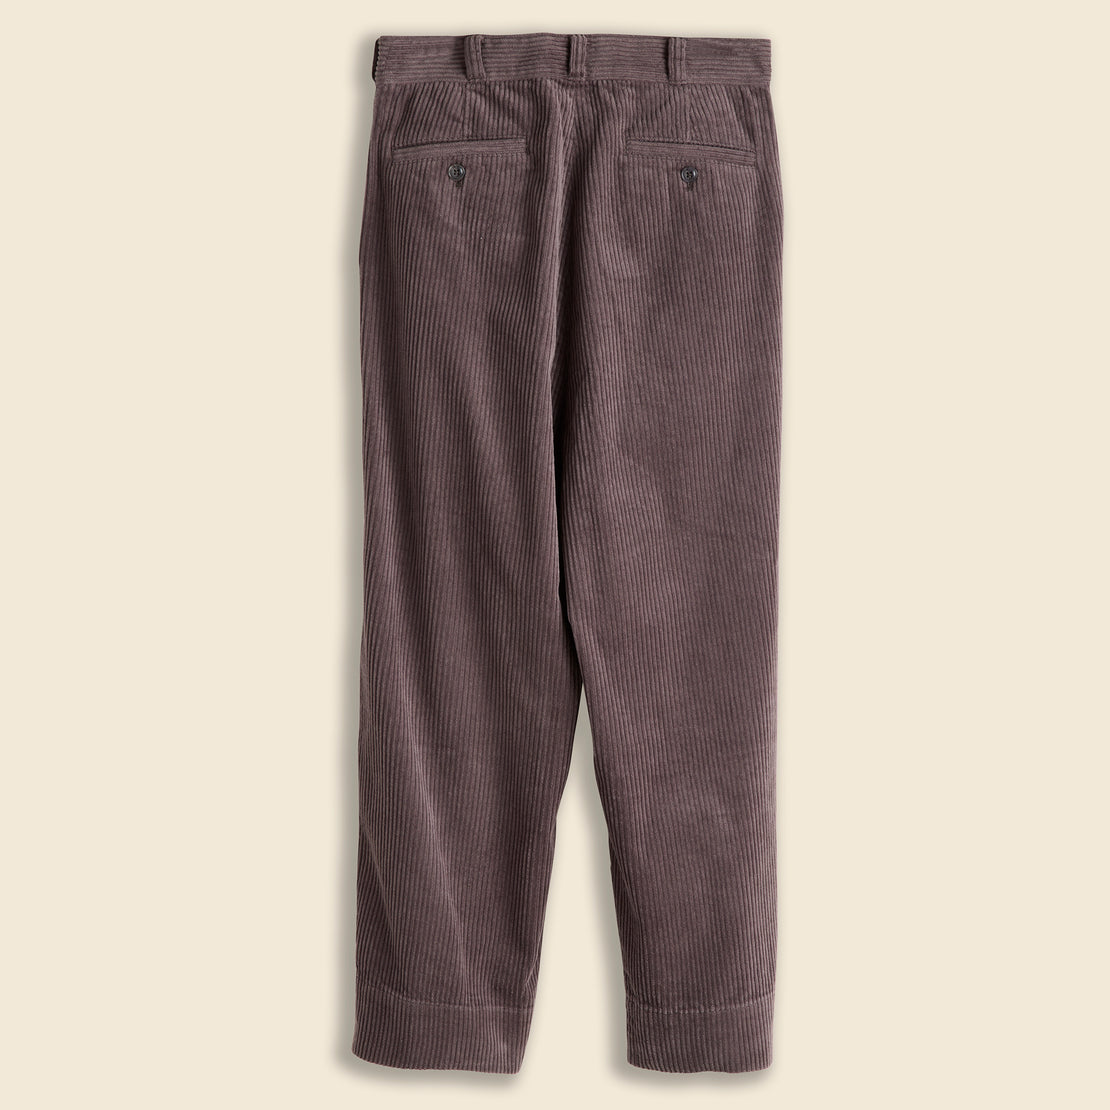 5 Wale Cropped Corduroy Pant - Charcoal - BEAMS BOY - STAG Provisions - W - Pants - Twill